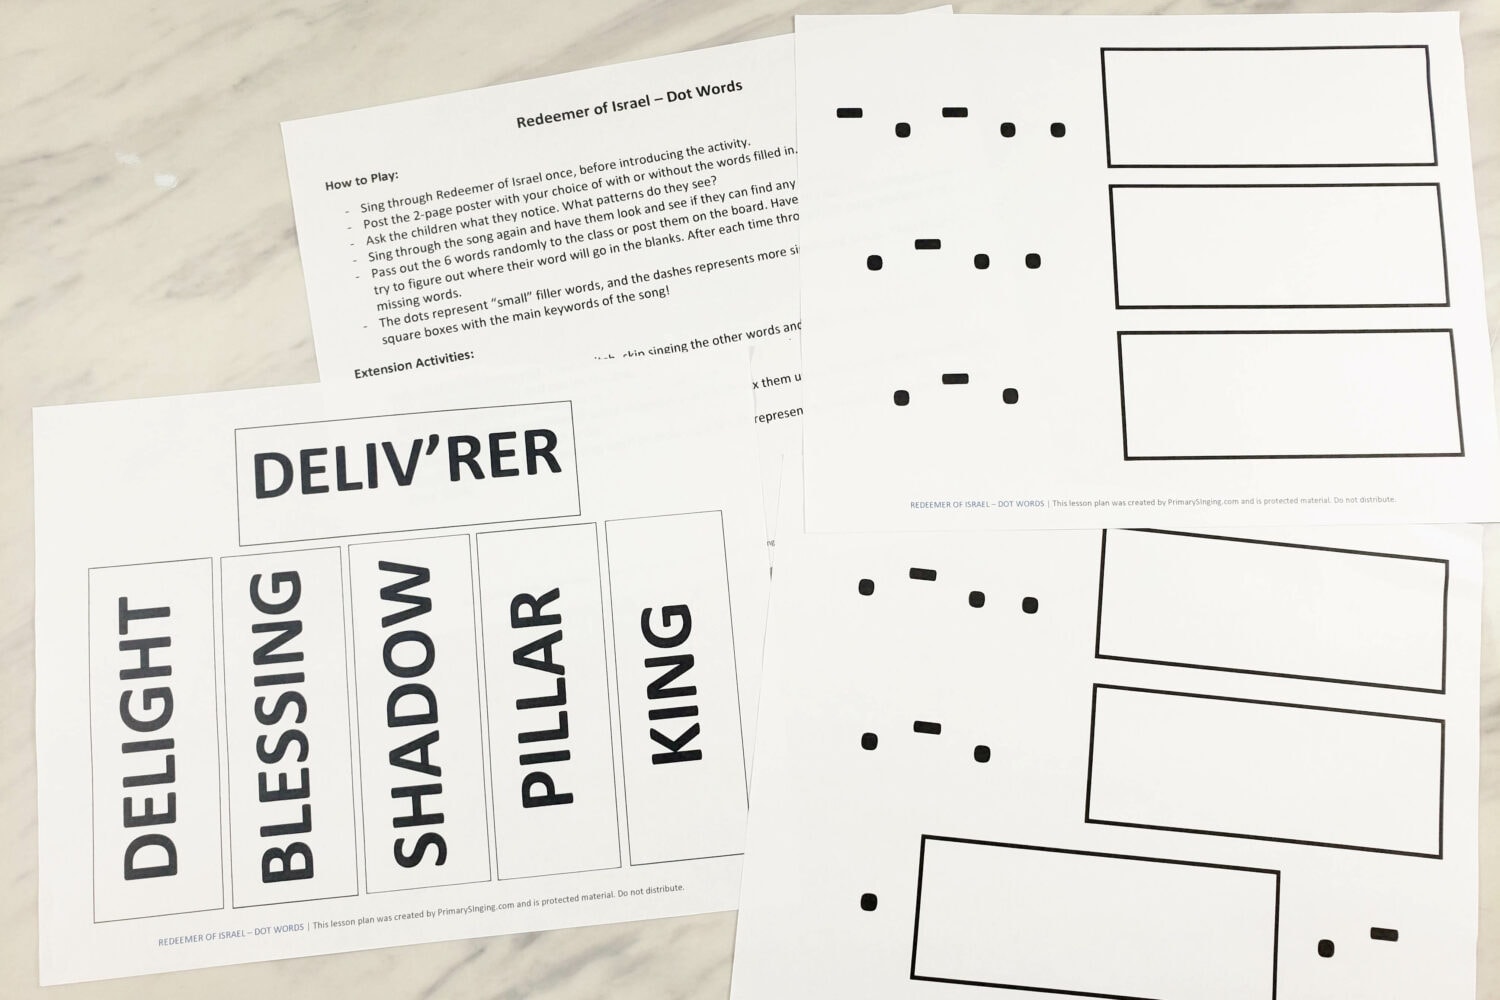 Redeemer of Israel Dot Words fun crack the code singing time idea for LDS Primary Music Leaders. Can they figure out the code and match the missing keywords? Plus fun extension ideas to add rhythms and challenge the kids.